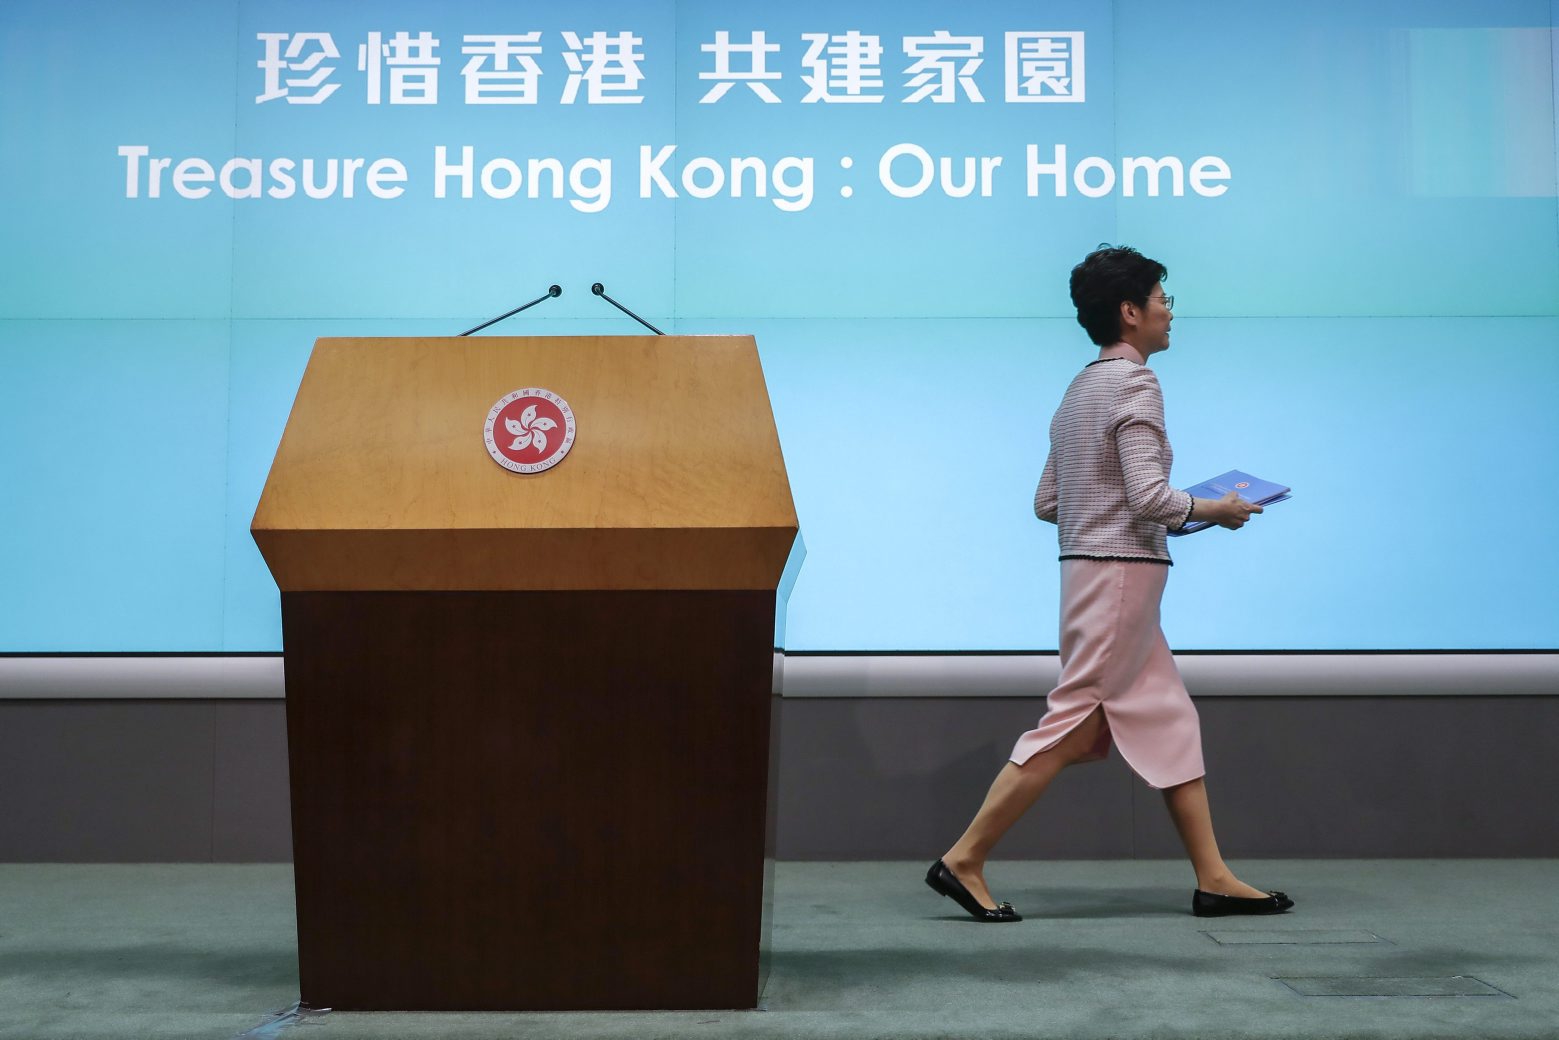 Hong Kong Chief Executive Carrie Lam leaves the stage after a press conference at the Legislative Council in Hong Kong Wednesday, Oct. 16, 2019. In chaotic scenes, furious pro-democracy lawmakers twice forced Hong Kong's leader to stop delivering a speech laying out her policy objectives and clamored for her to resign after she walked out of the legislature on Wednesday and then delivered the annual address 75 minutes late via television. (AP Photo/Mark Schiefelbein)
Carrie Lam Hong Kong Protests